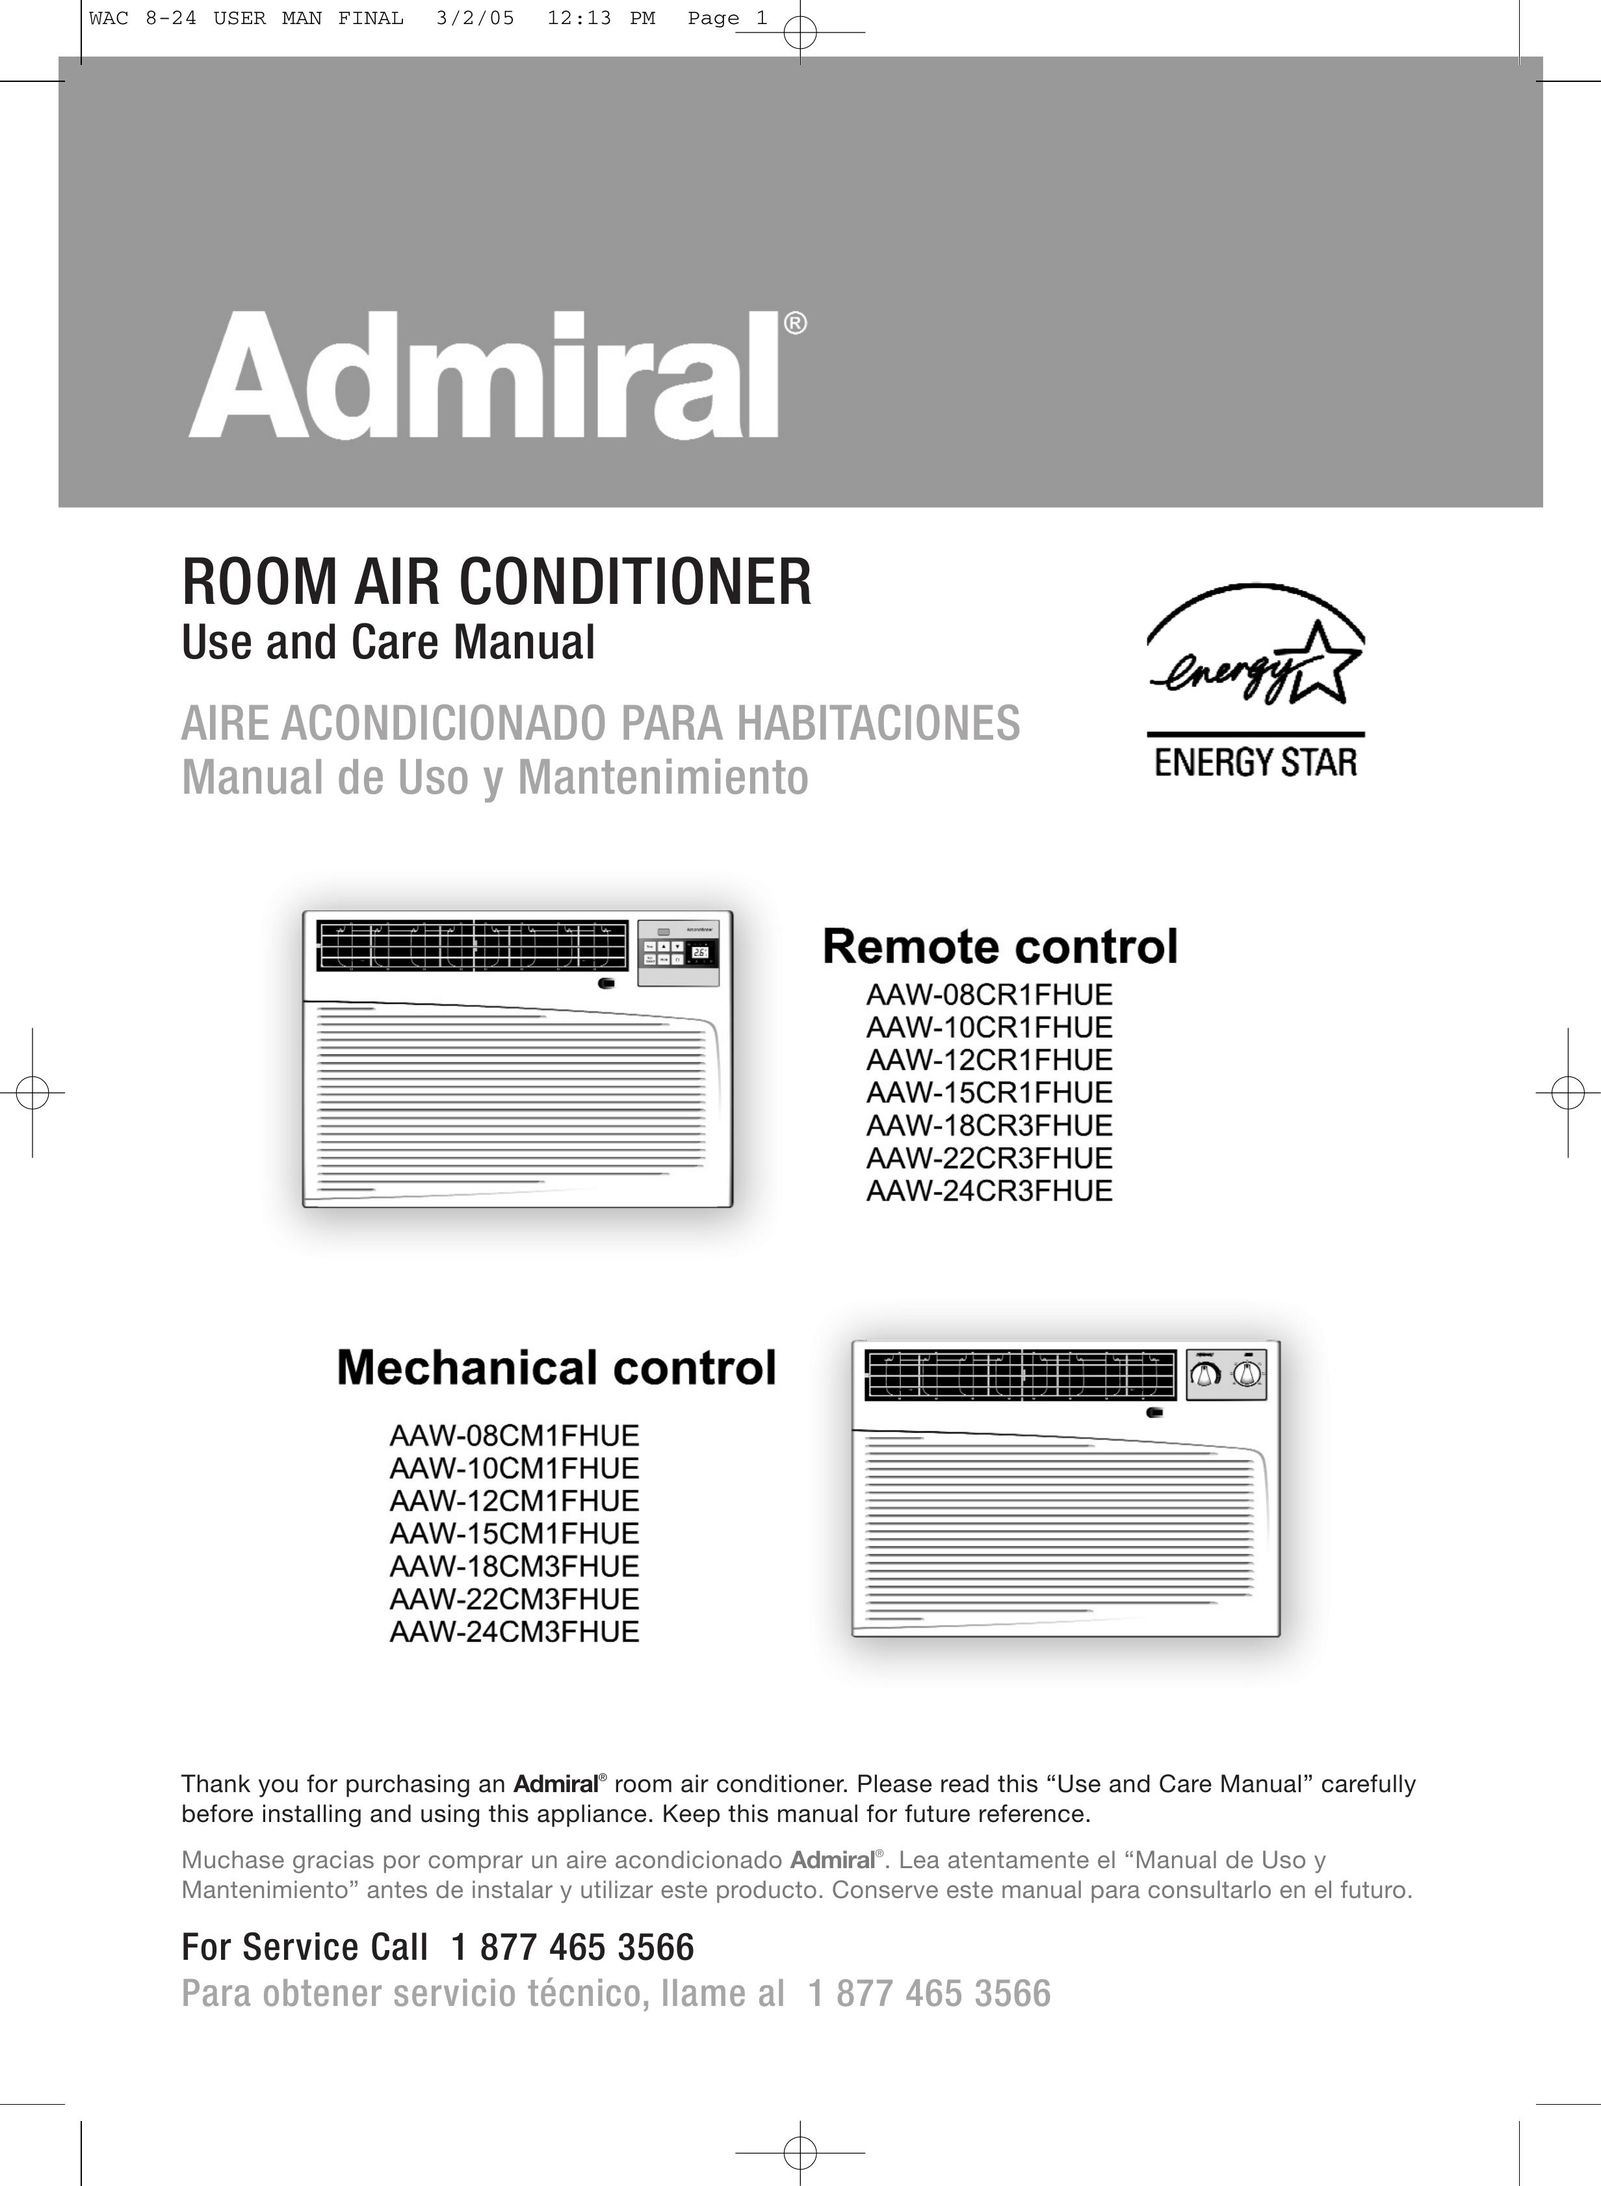 Admiral AAW-12CM1FHUE Air Conditioner User Manual